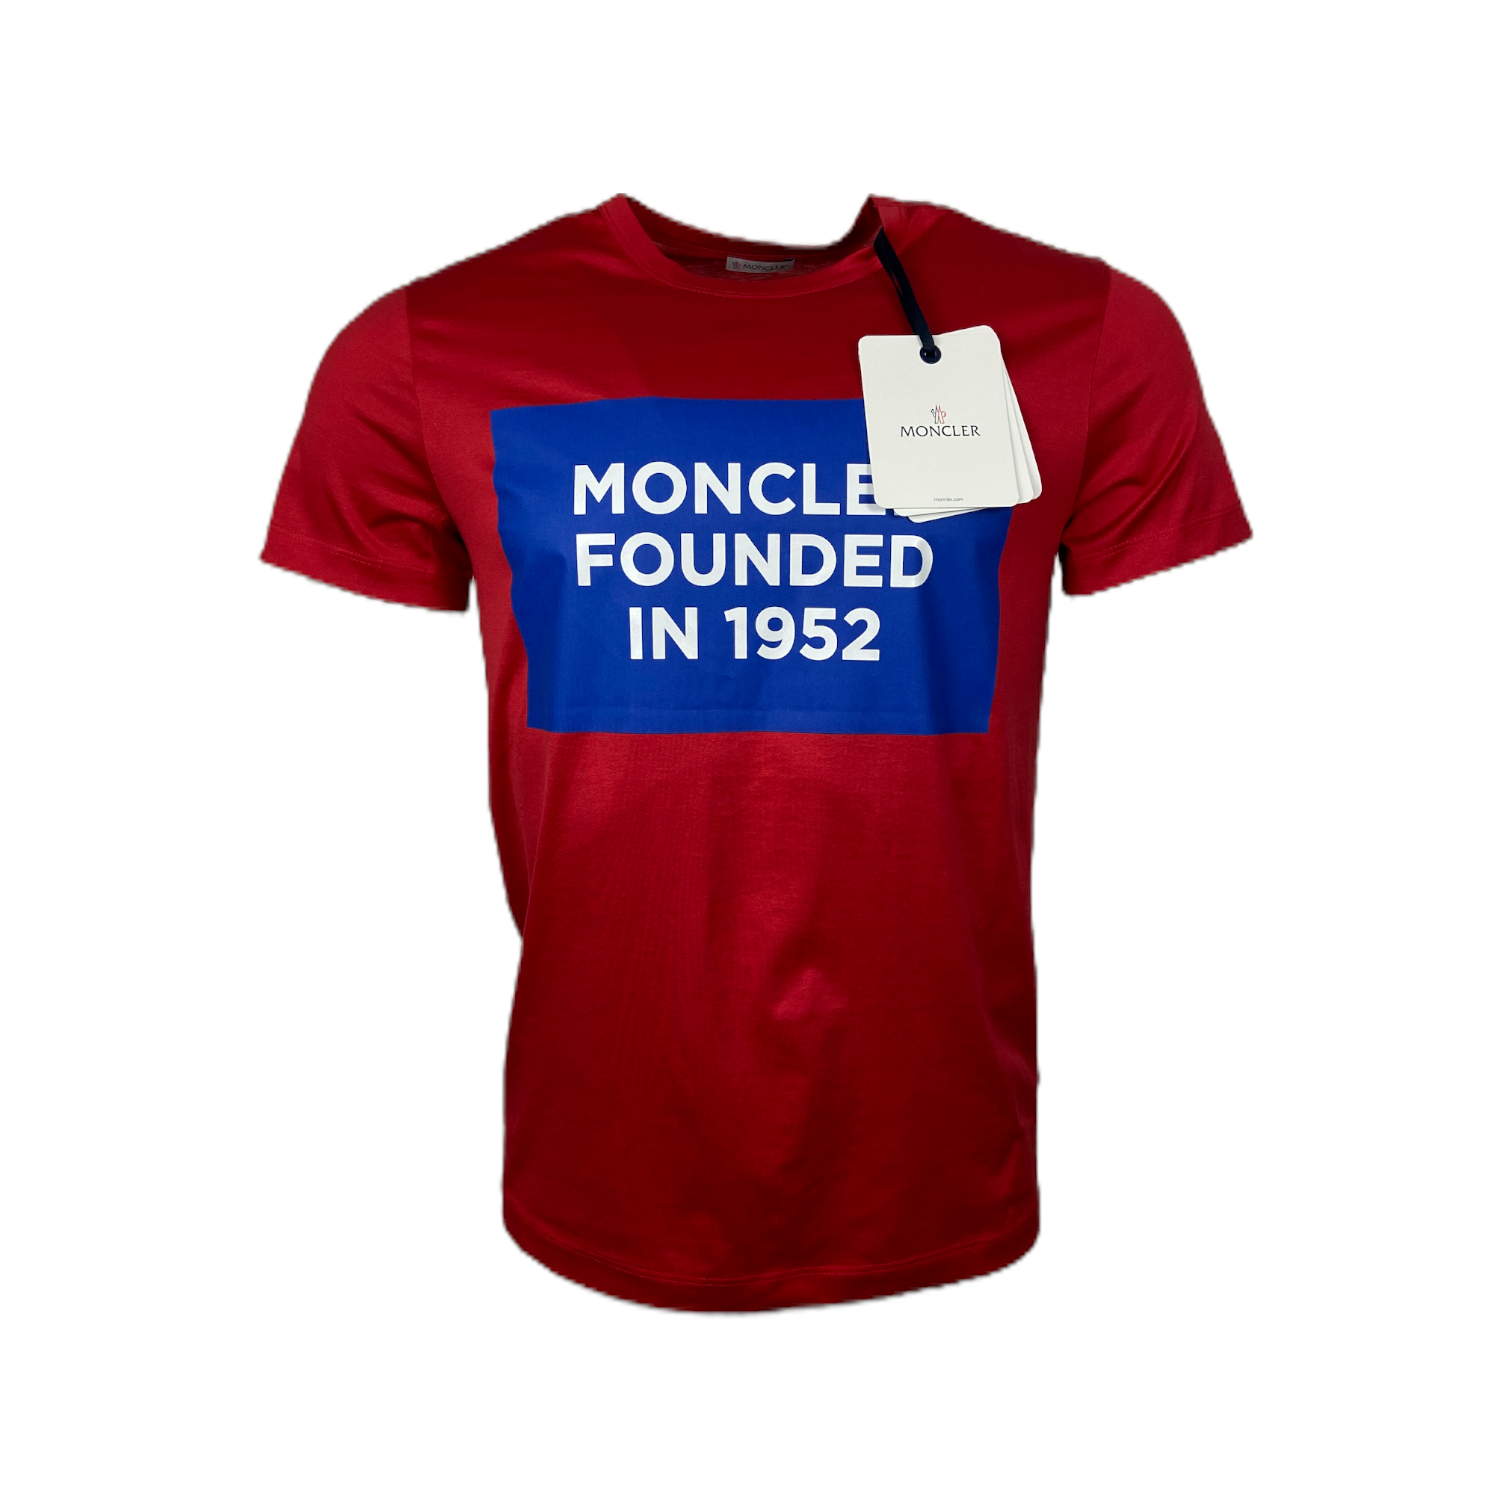 Moncler Founded T-Shirt